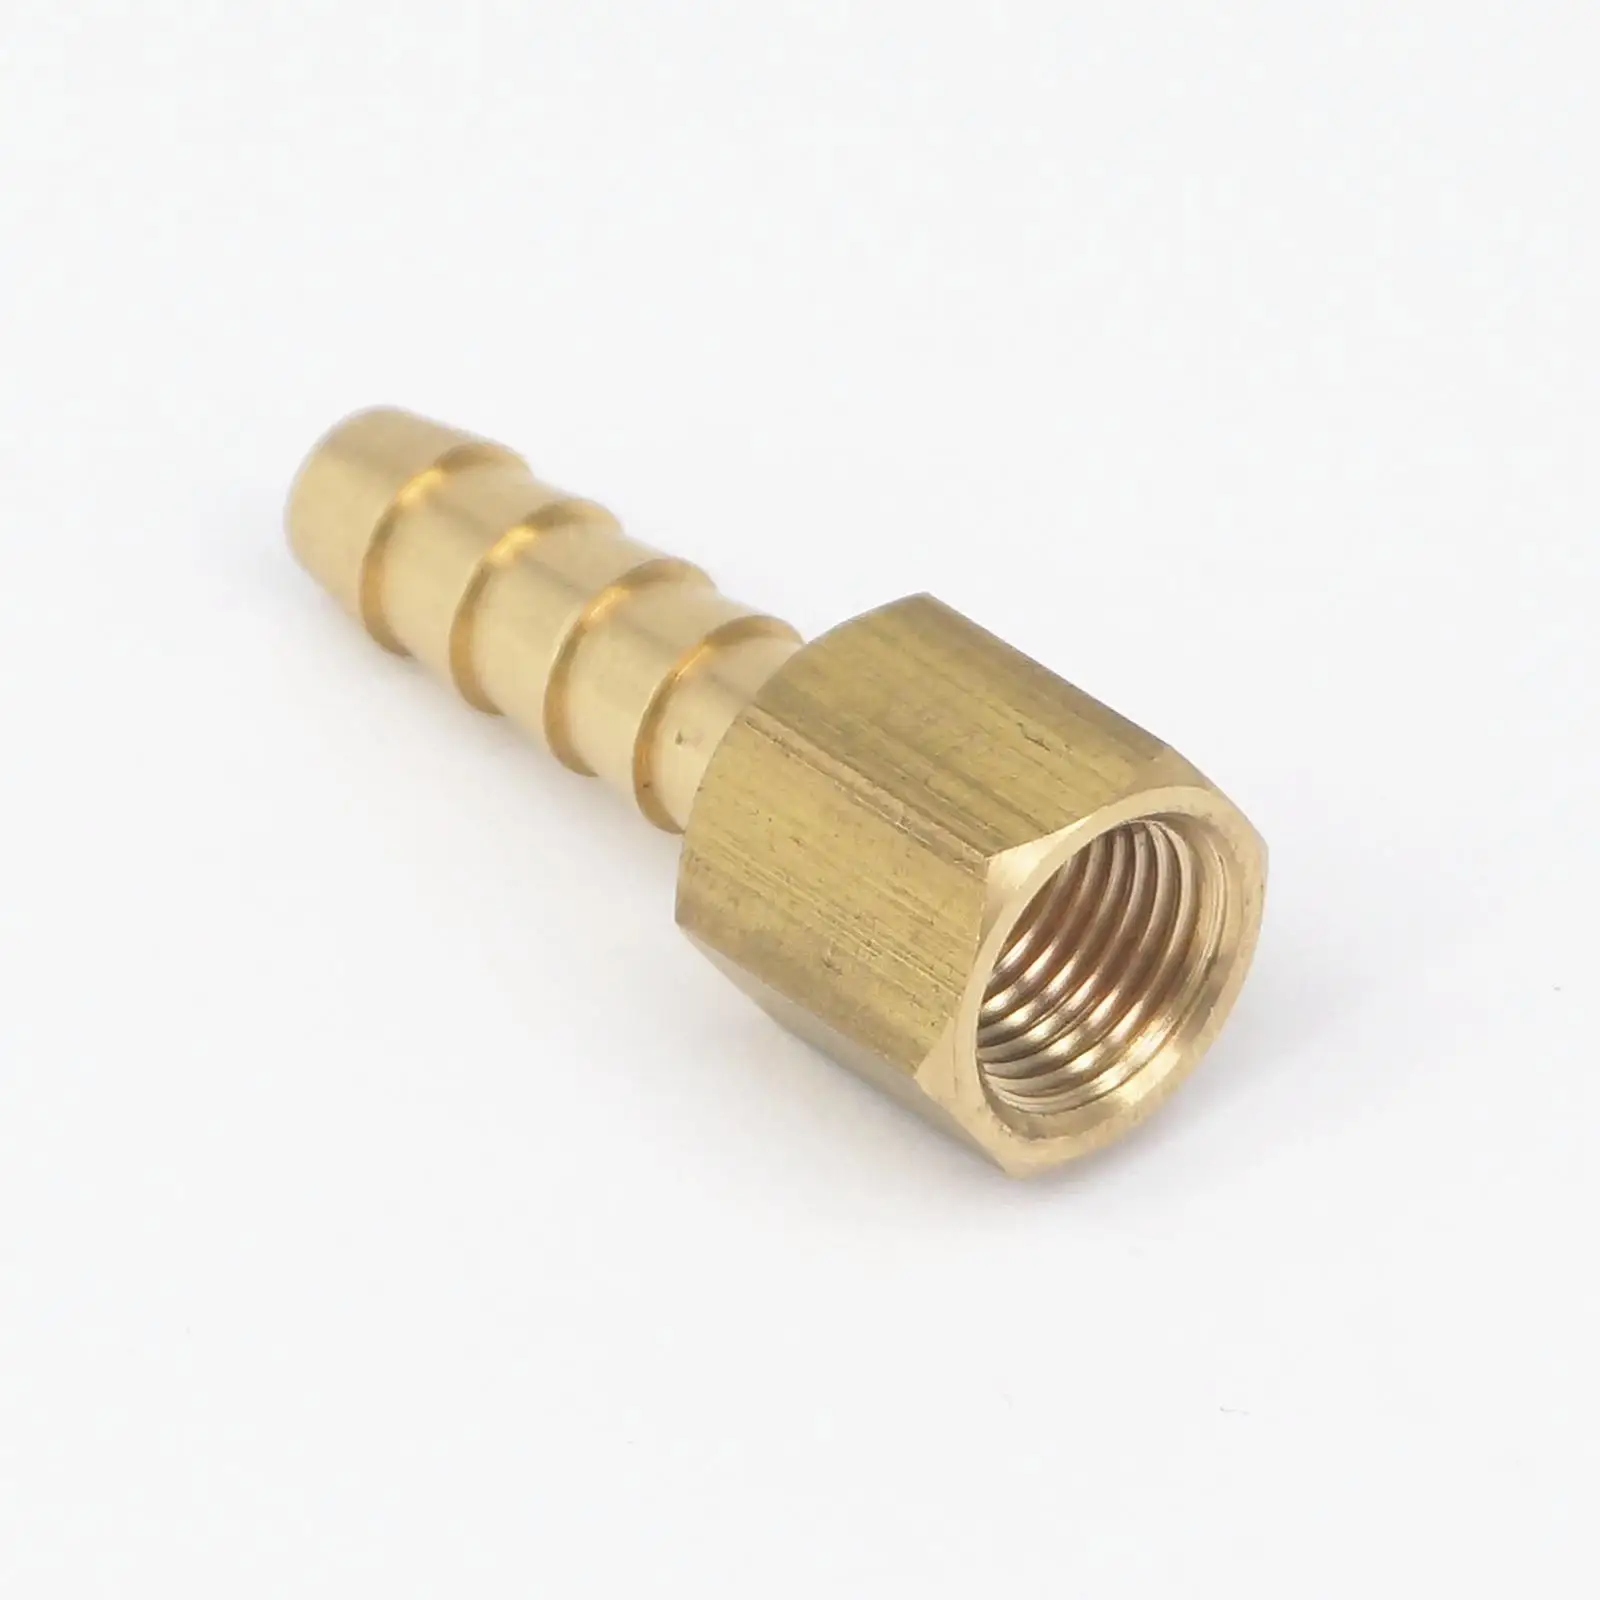 1/8" 1/4" 3/8" NPT Female x Hose Barb Tail Brass Fuel Fitting Connector Adapter 